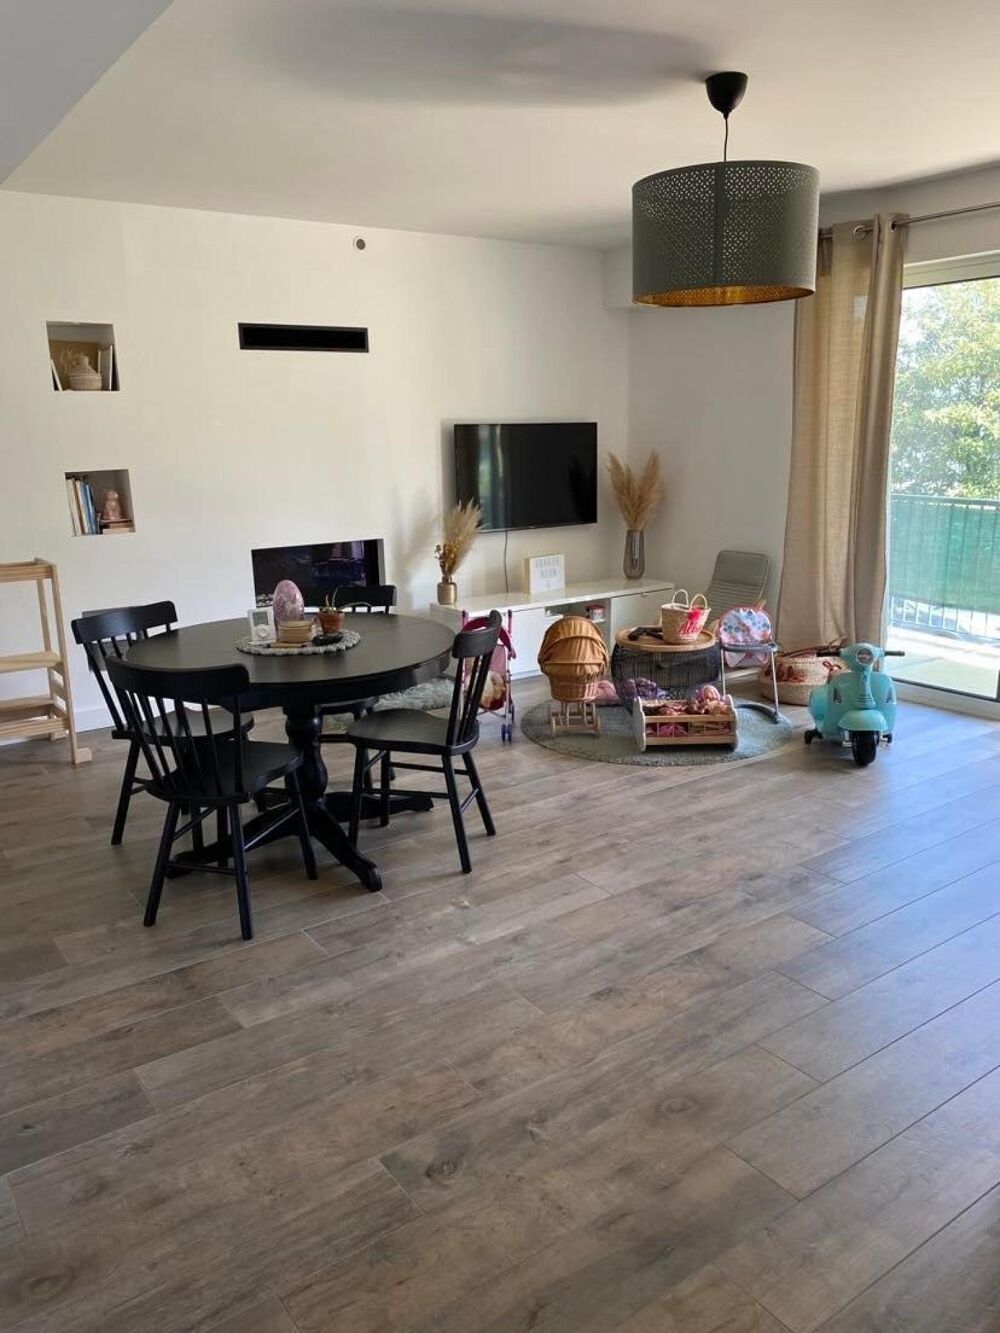 Vente Appartement Bayonne, Marracq- Ecoles, collges lyce, Hpital Bayonne